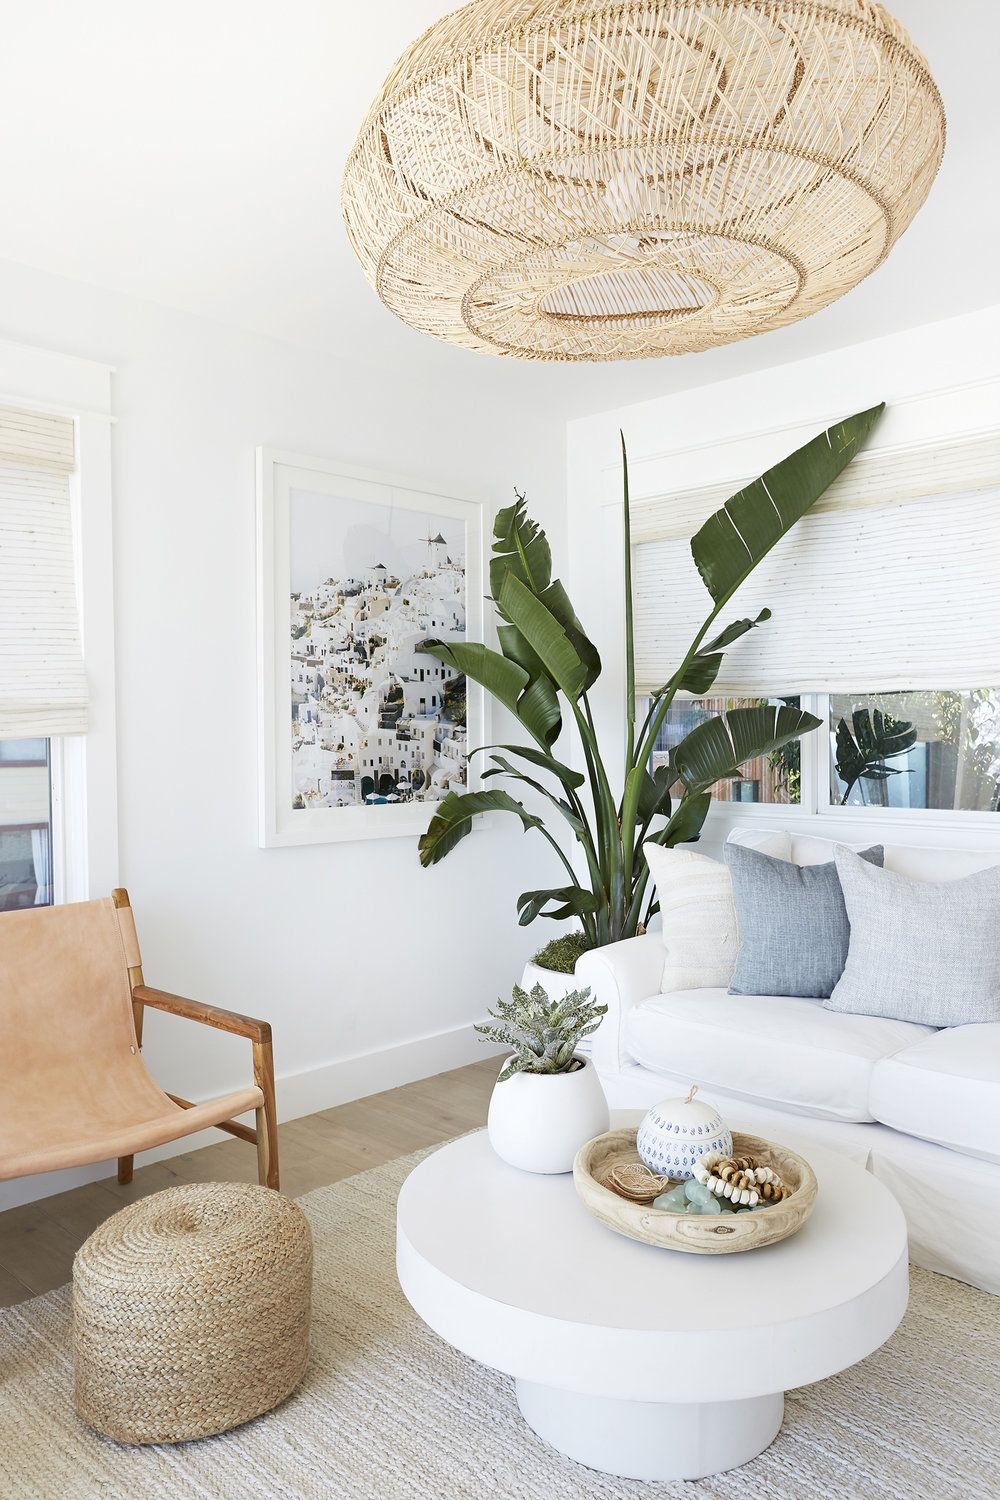 Give a Tropical Style in the Living Room